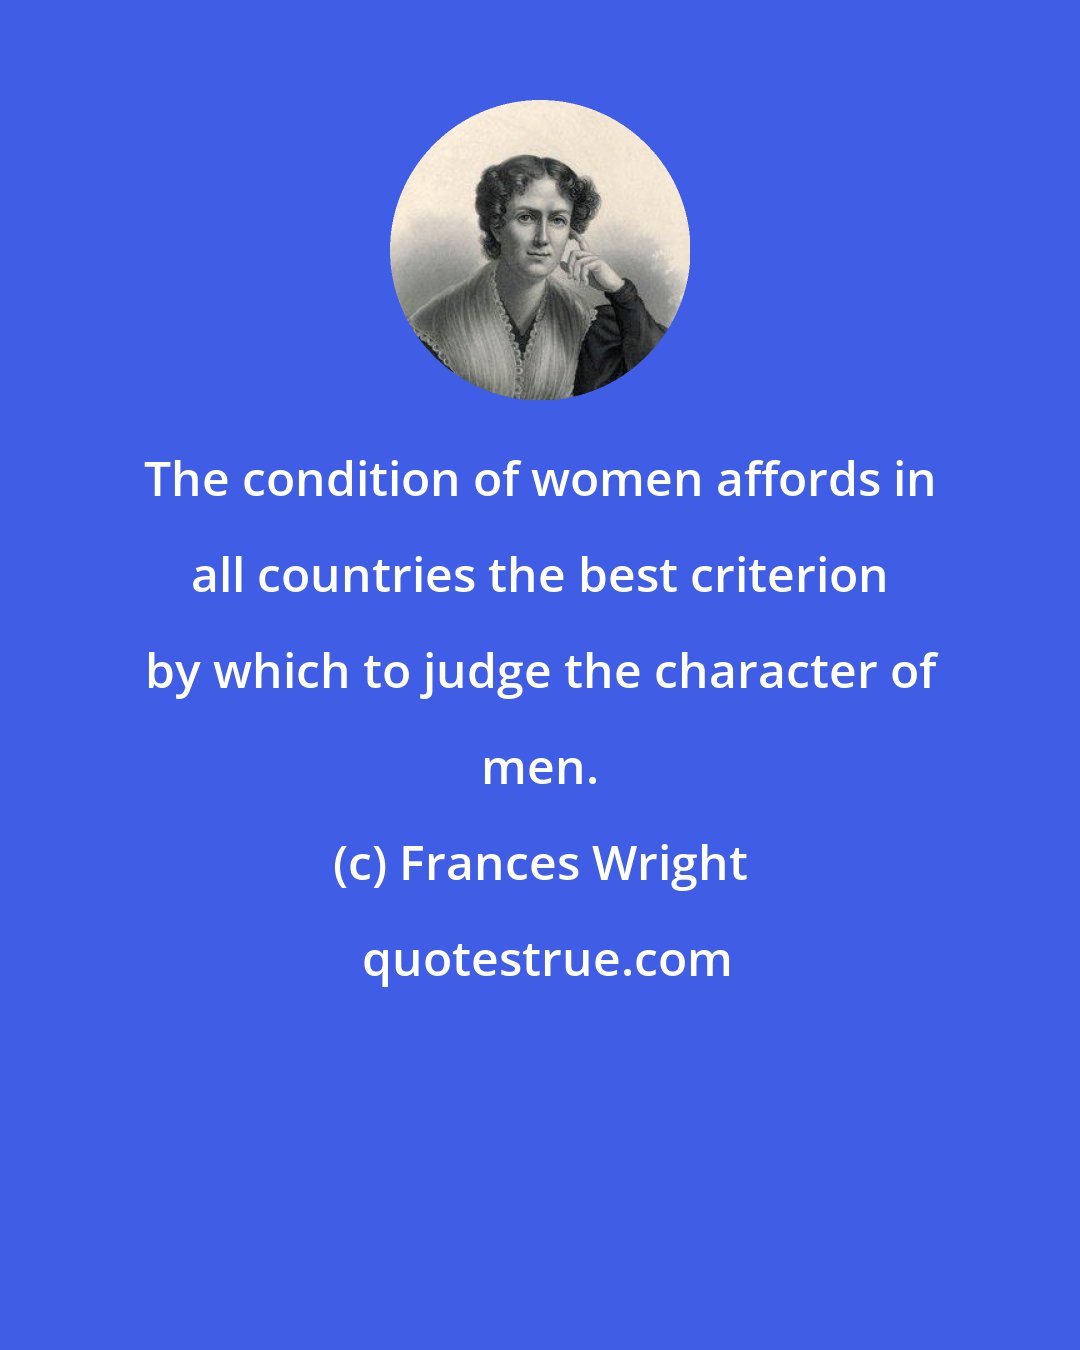 Frances Wright: The condition of women affords in all countries the best criterion by which to judge the character of men.